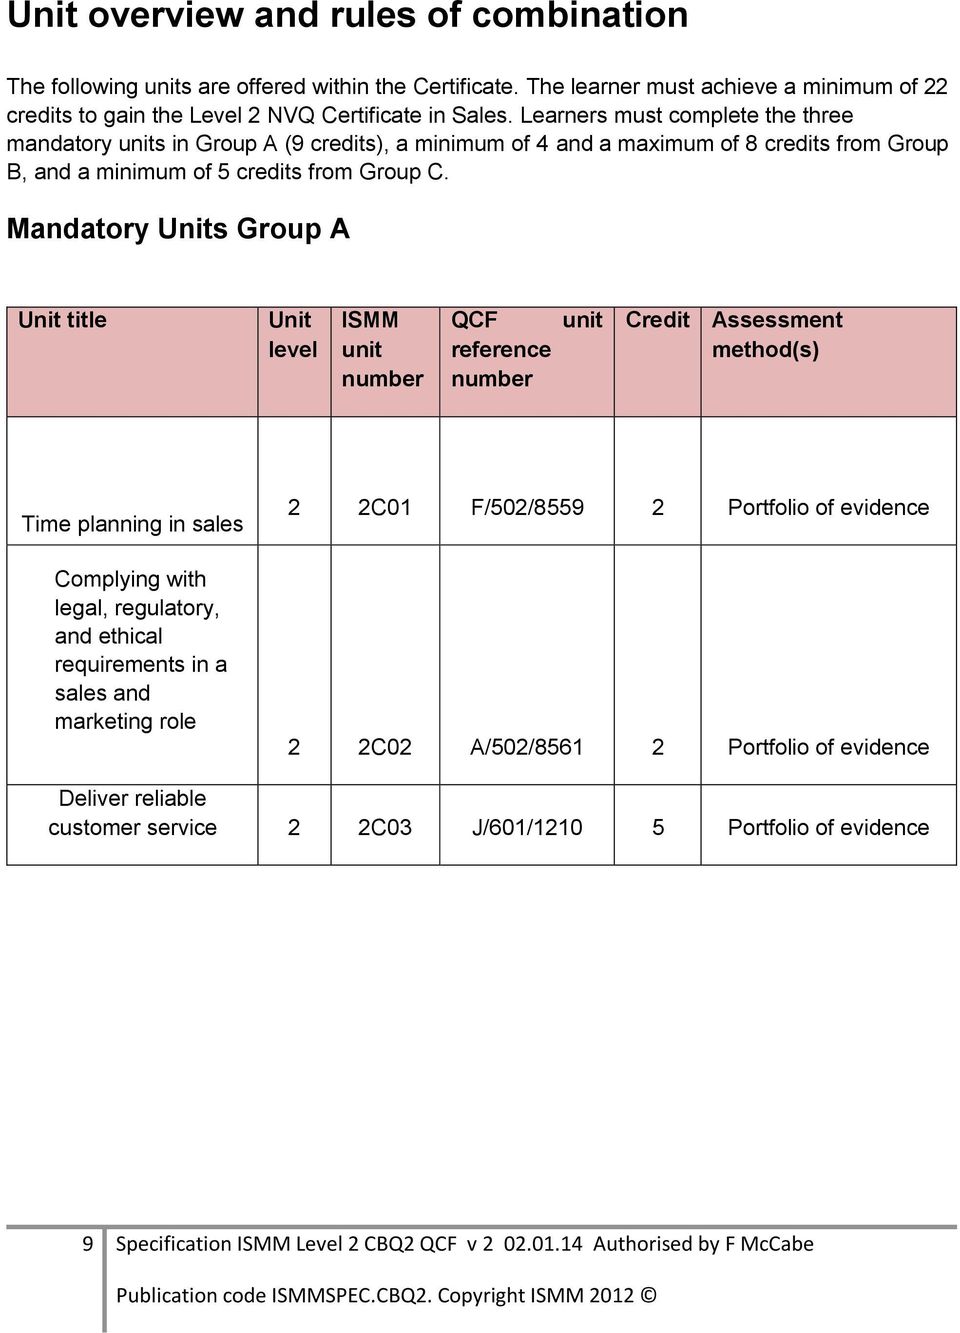 Mandatory Units Group A Unit title Unit level ISMM unit number QCF reference number unit Credit Assessment method(s) Time planning in sales Complying with legal, regulatory, and ethical requirements